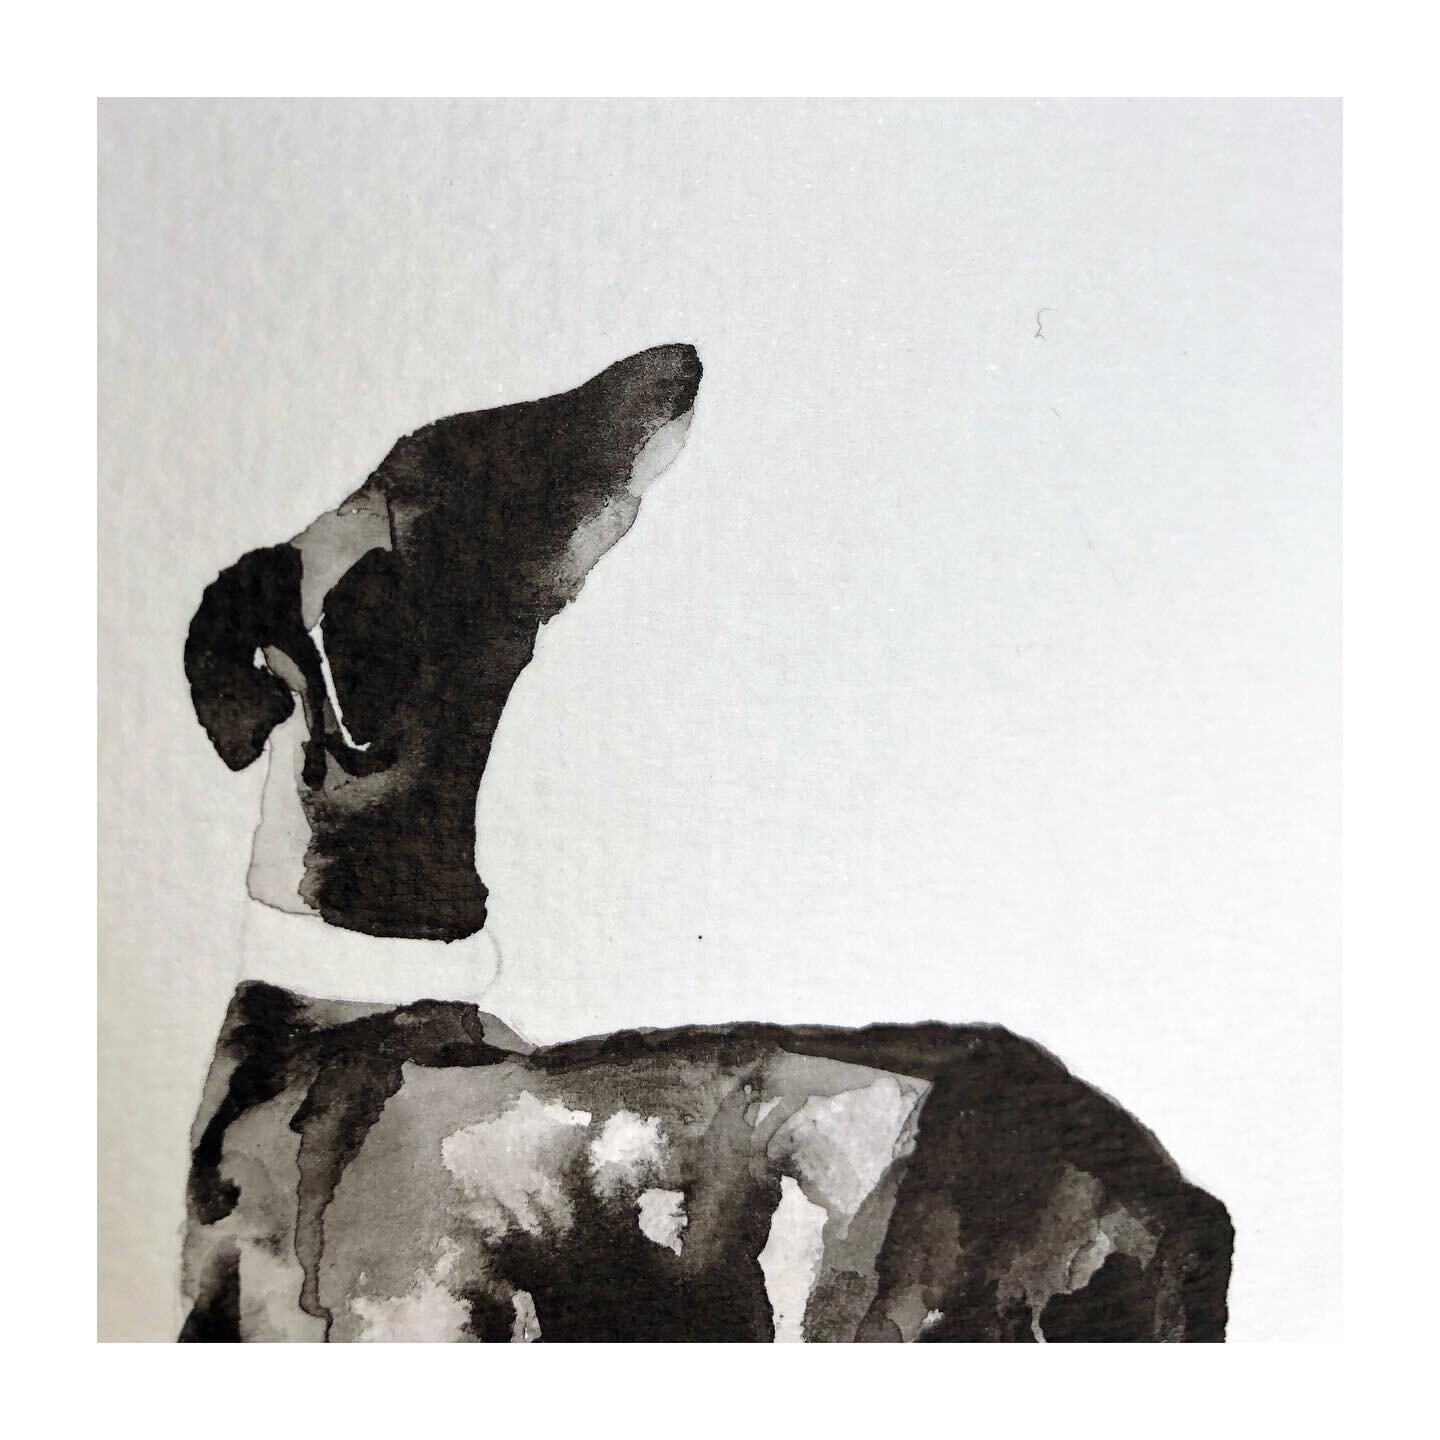 Throwback to last Summer when I was working on a greyhound commission. I ended up settling on a different image but was contacted by a lovely lady whose own beloved black greyhound had recently died and she asked if she could have this piece. So plea